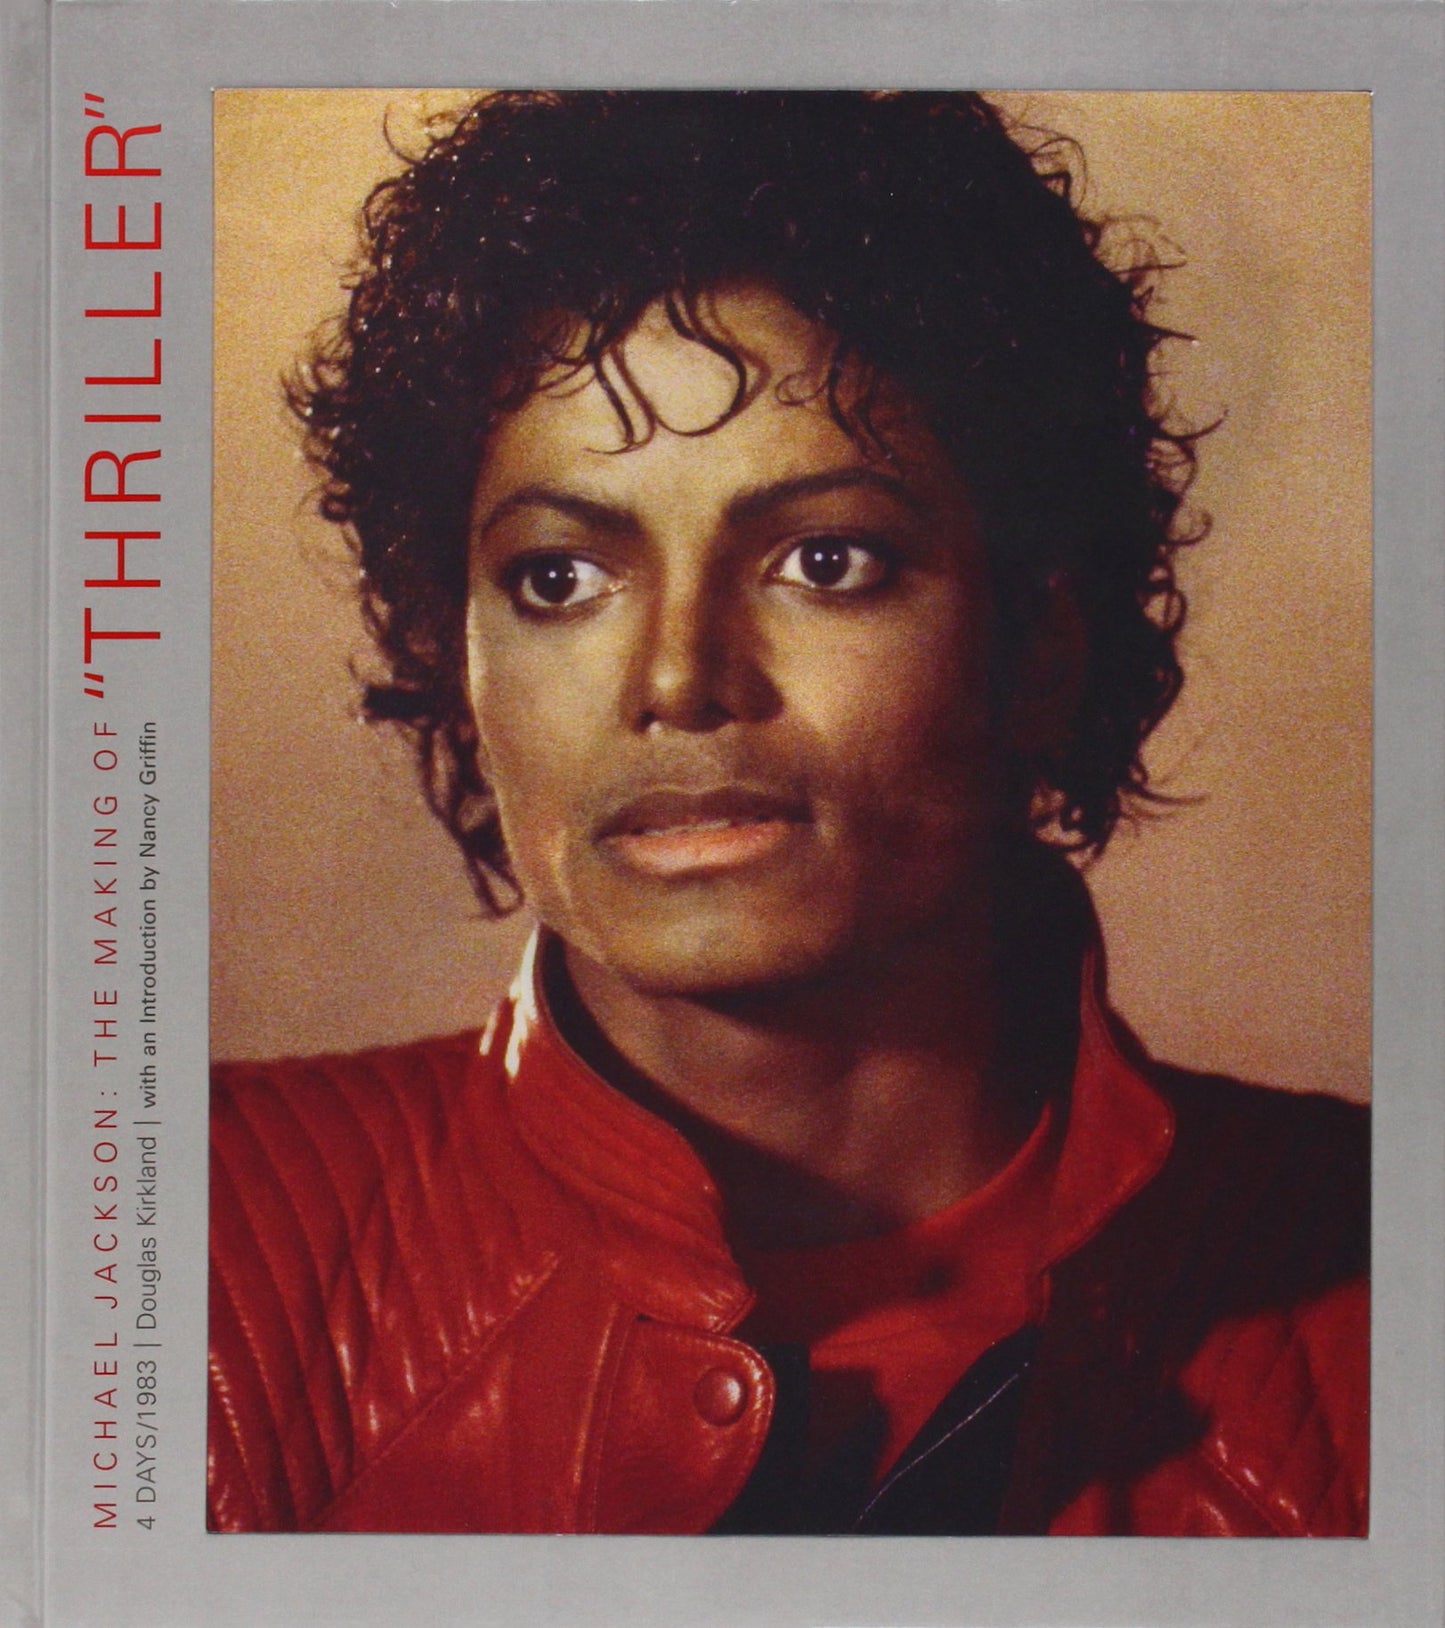 MICHAEL JACKSON - THE MAKING OF "THRILLER" - BOOK